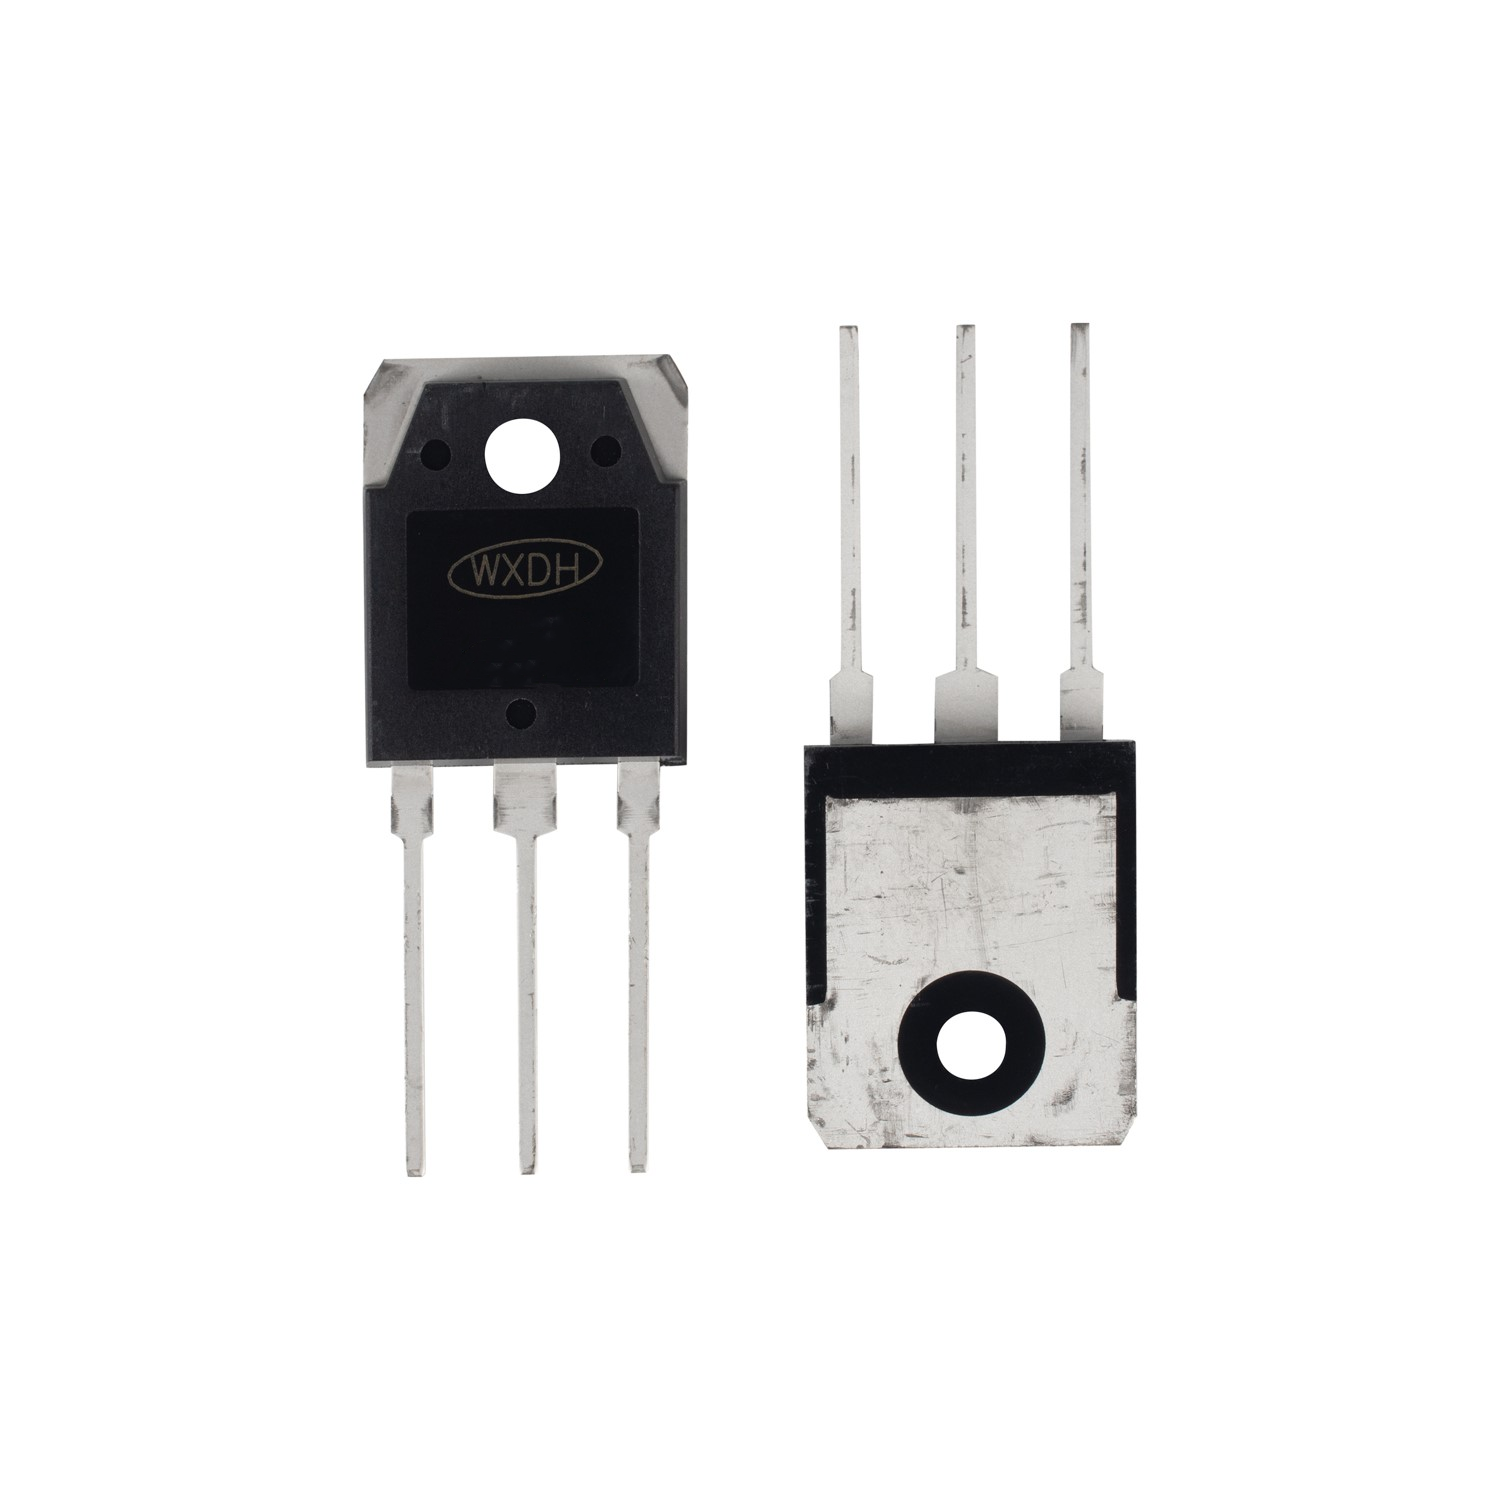 80A 200V Fast recovery diode MUR8020CT